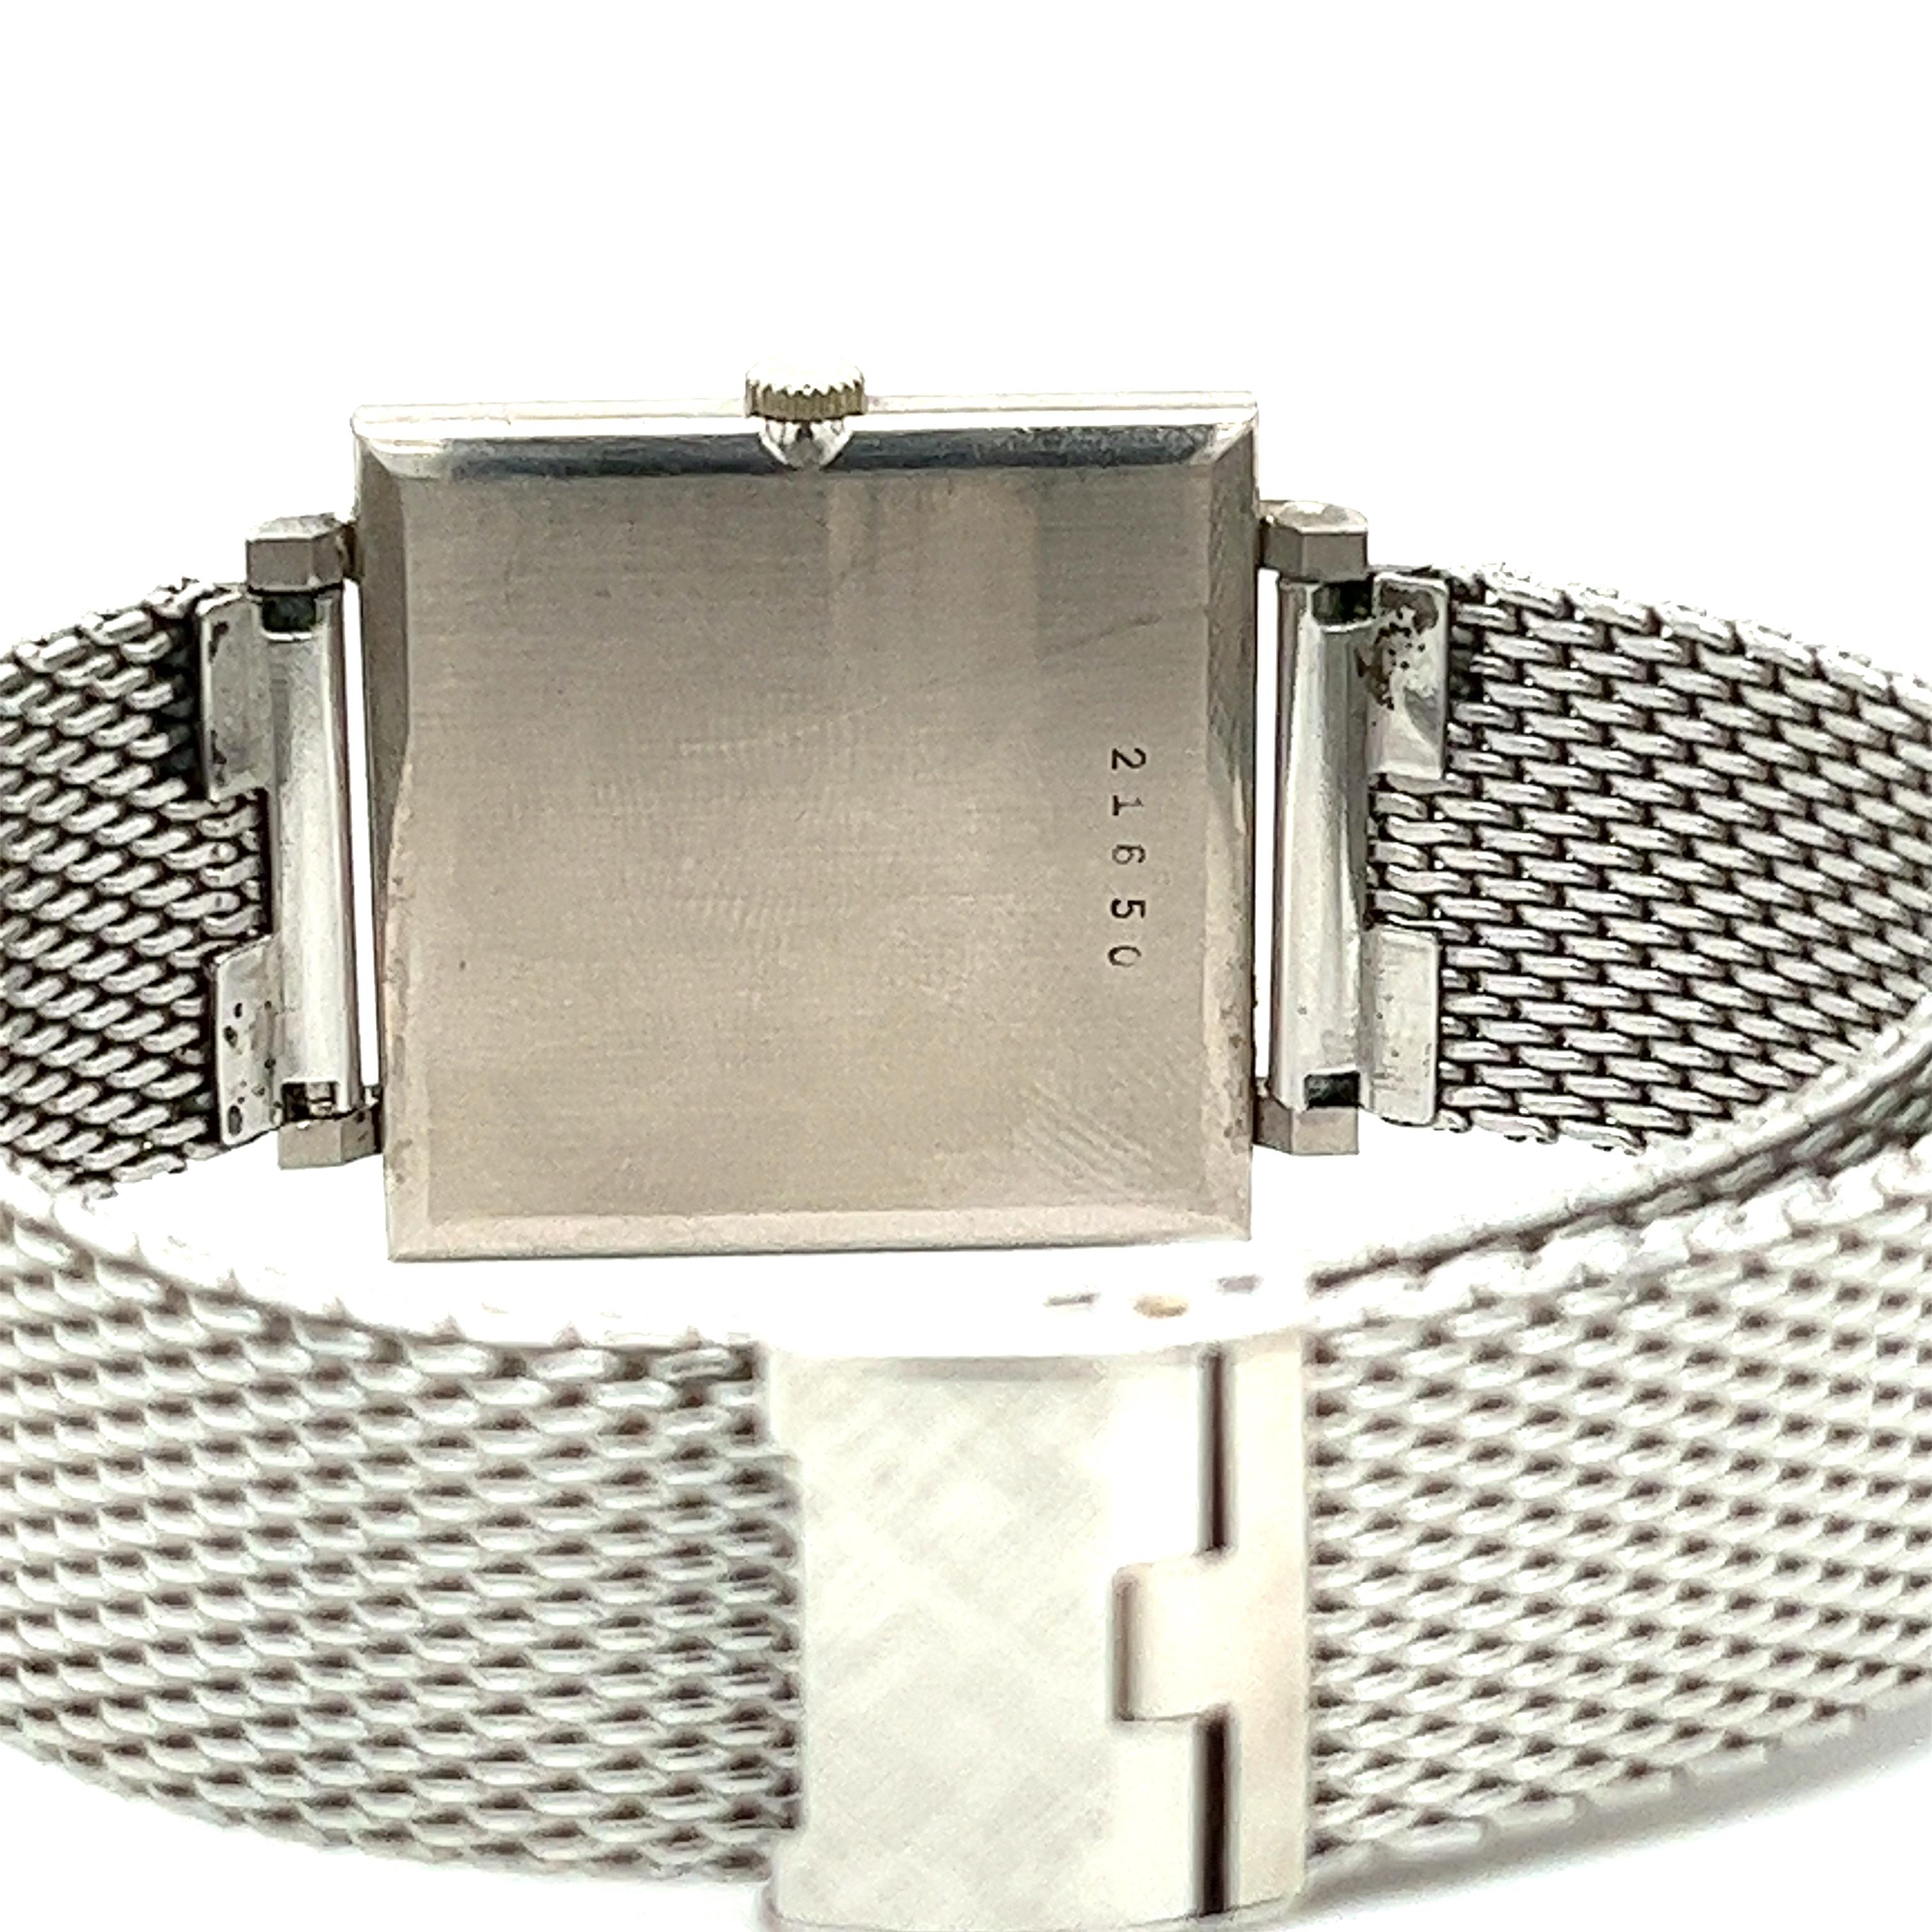 Antique Audemars Piguet Ultra Thin Square Unisex 25mm Watch in 18K White Gold In Fair Condition For Sale In Miami, FL